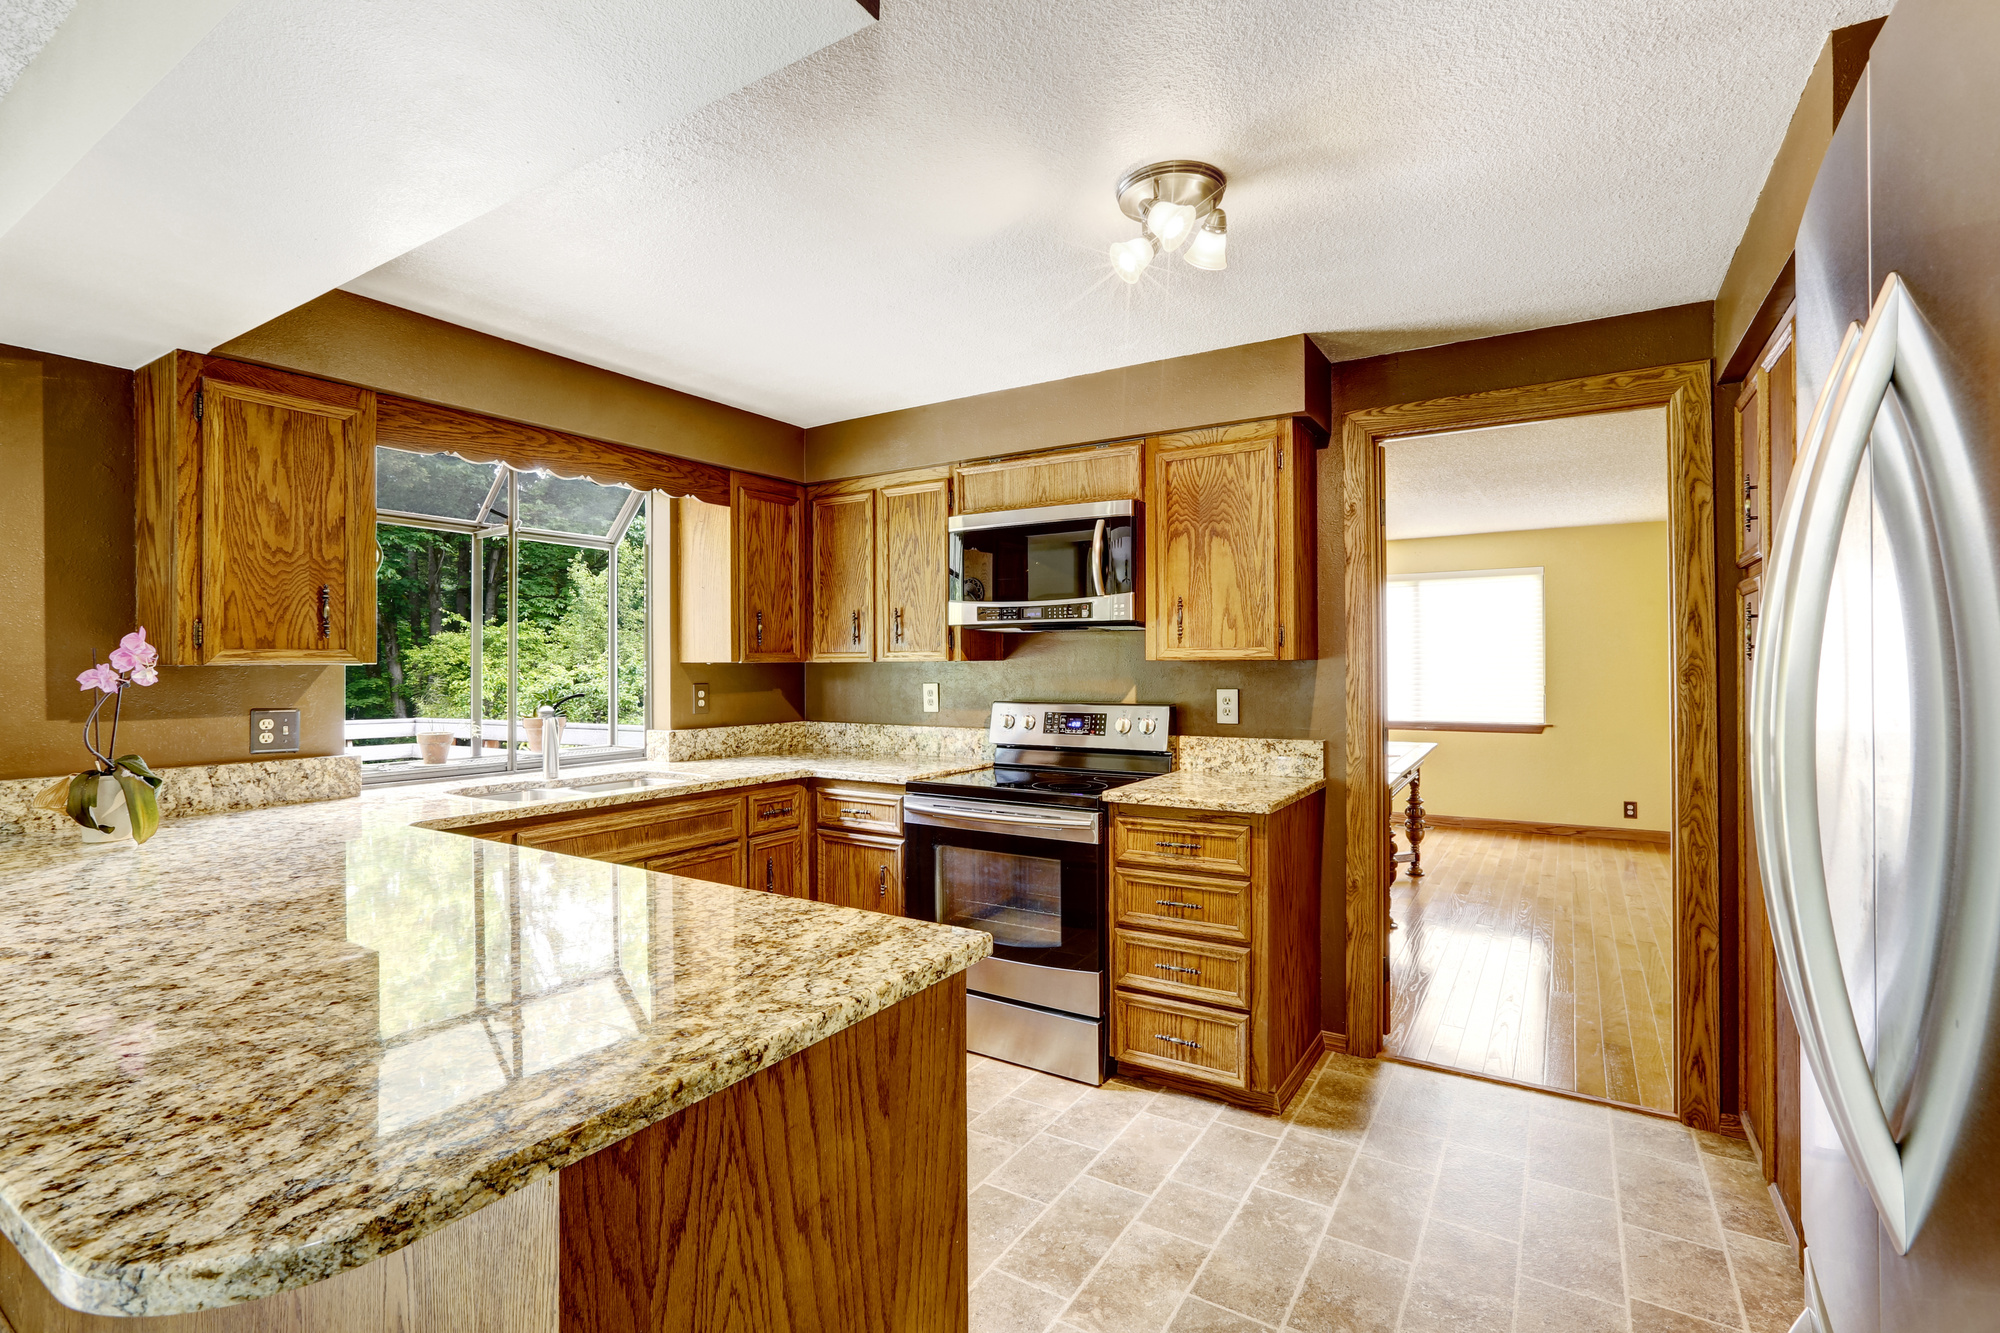 No kitchen remodel is complete without a new set of counters. This is how to choose the best counters for your remodeling project.